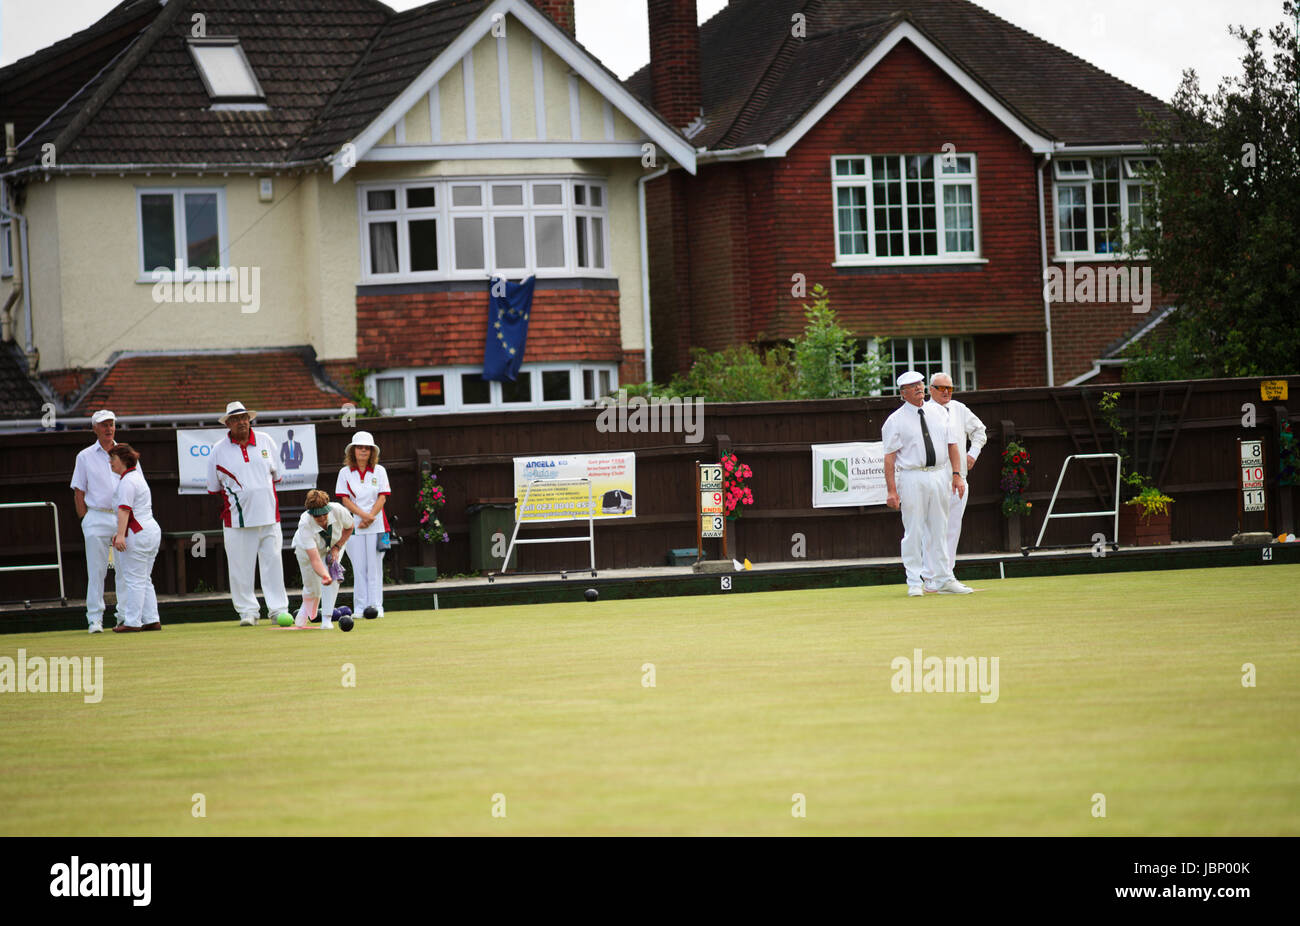 People playing lawn bowls outdoors on a bowling green in Hampshire, UK Stock Photo